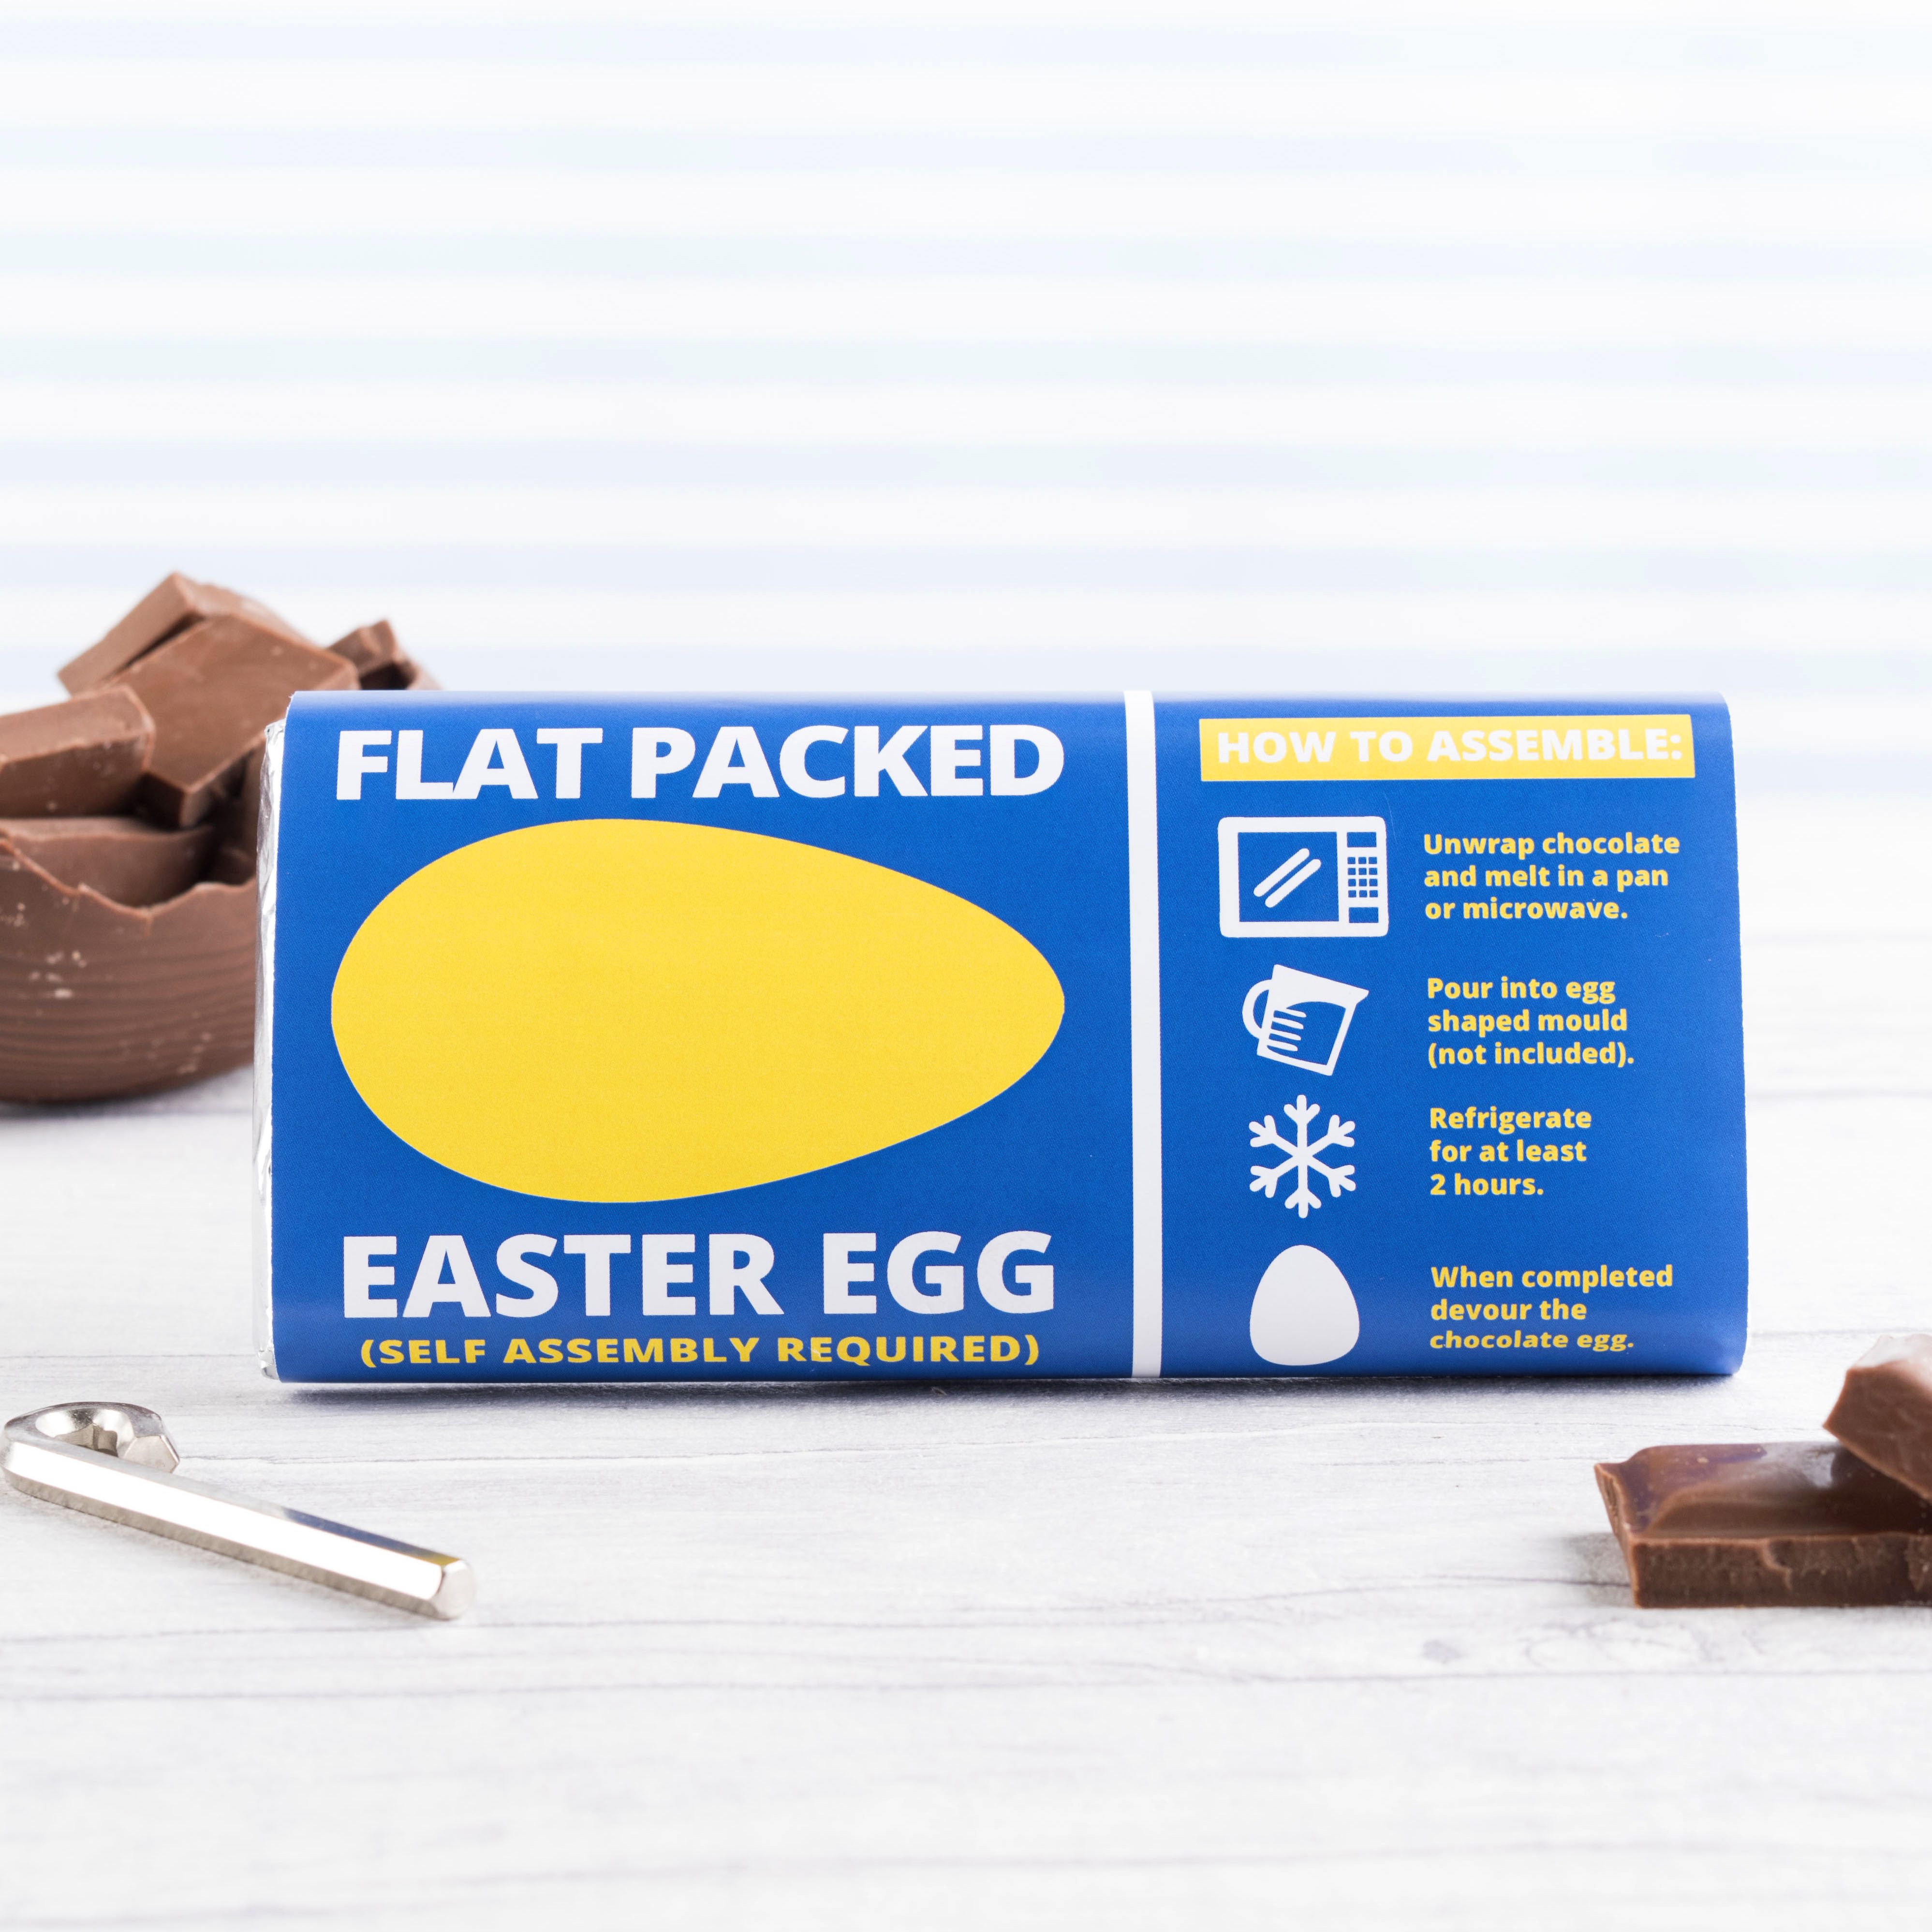 Personalised Chocolate Bar - Flat Packed Easter Egg